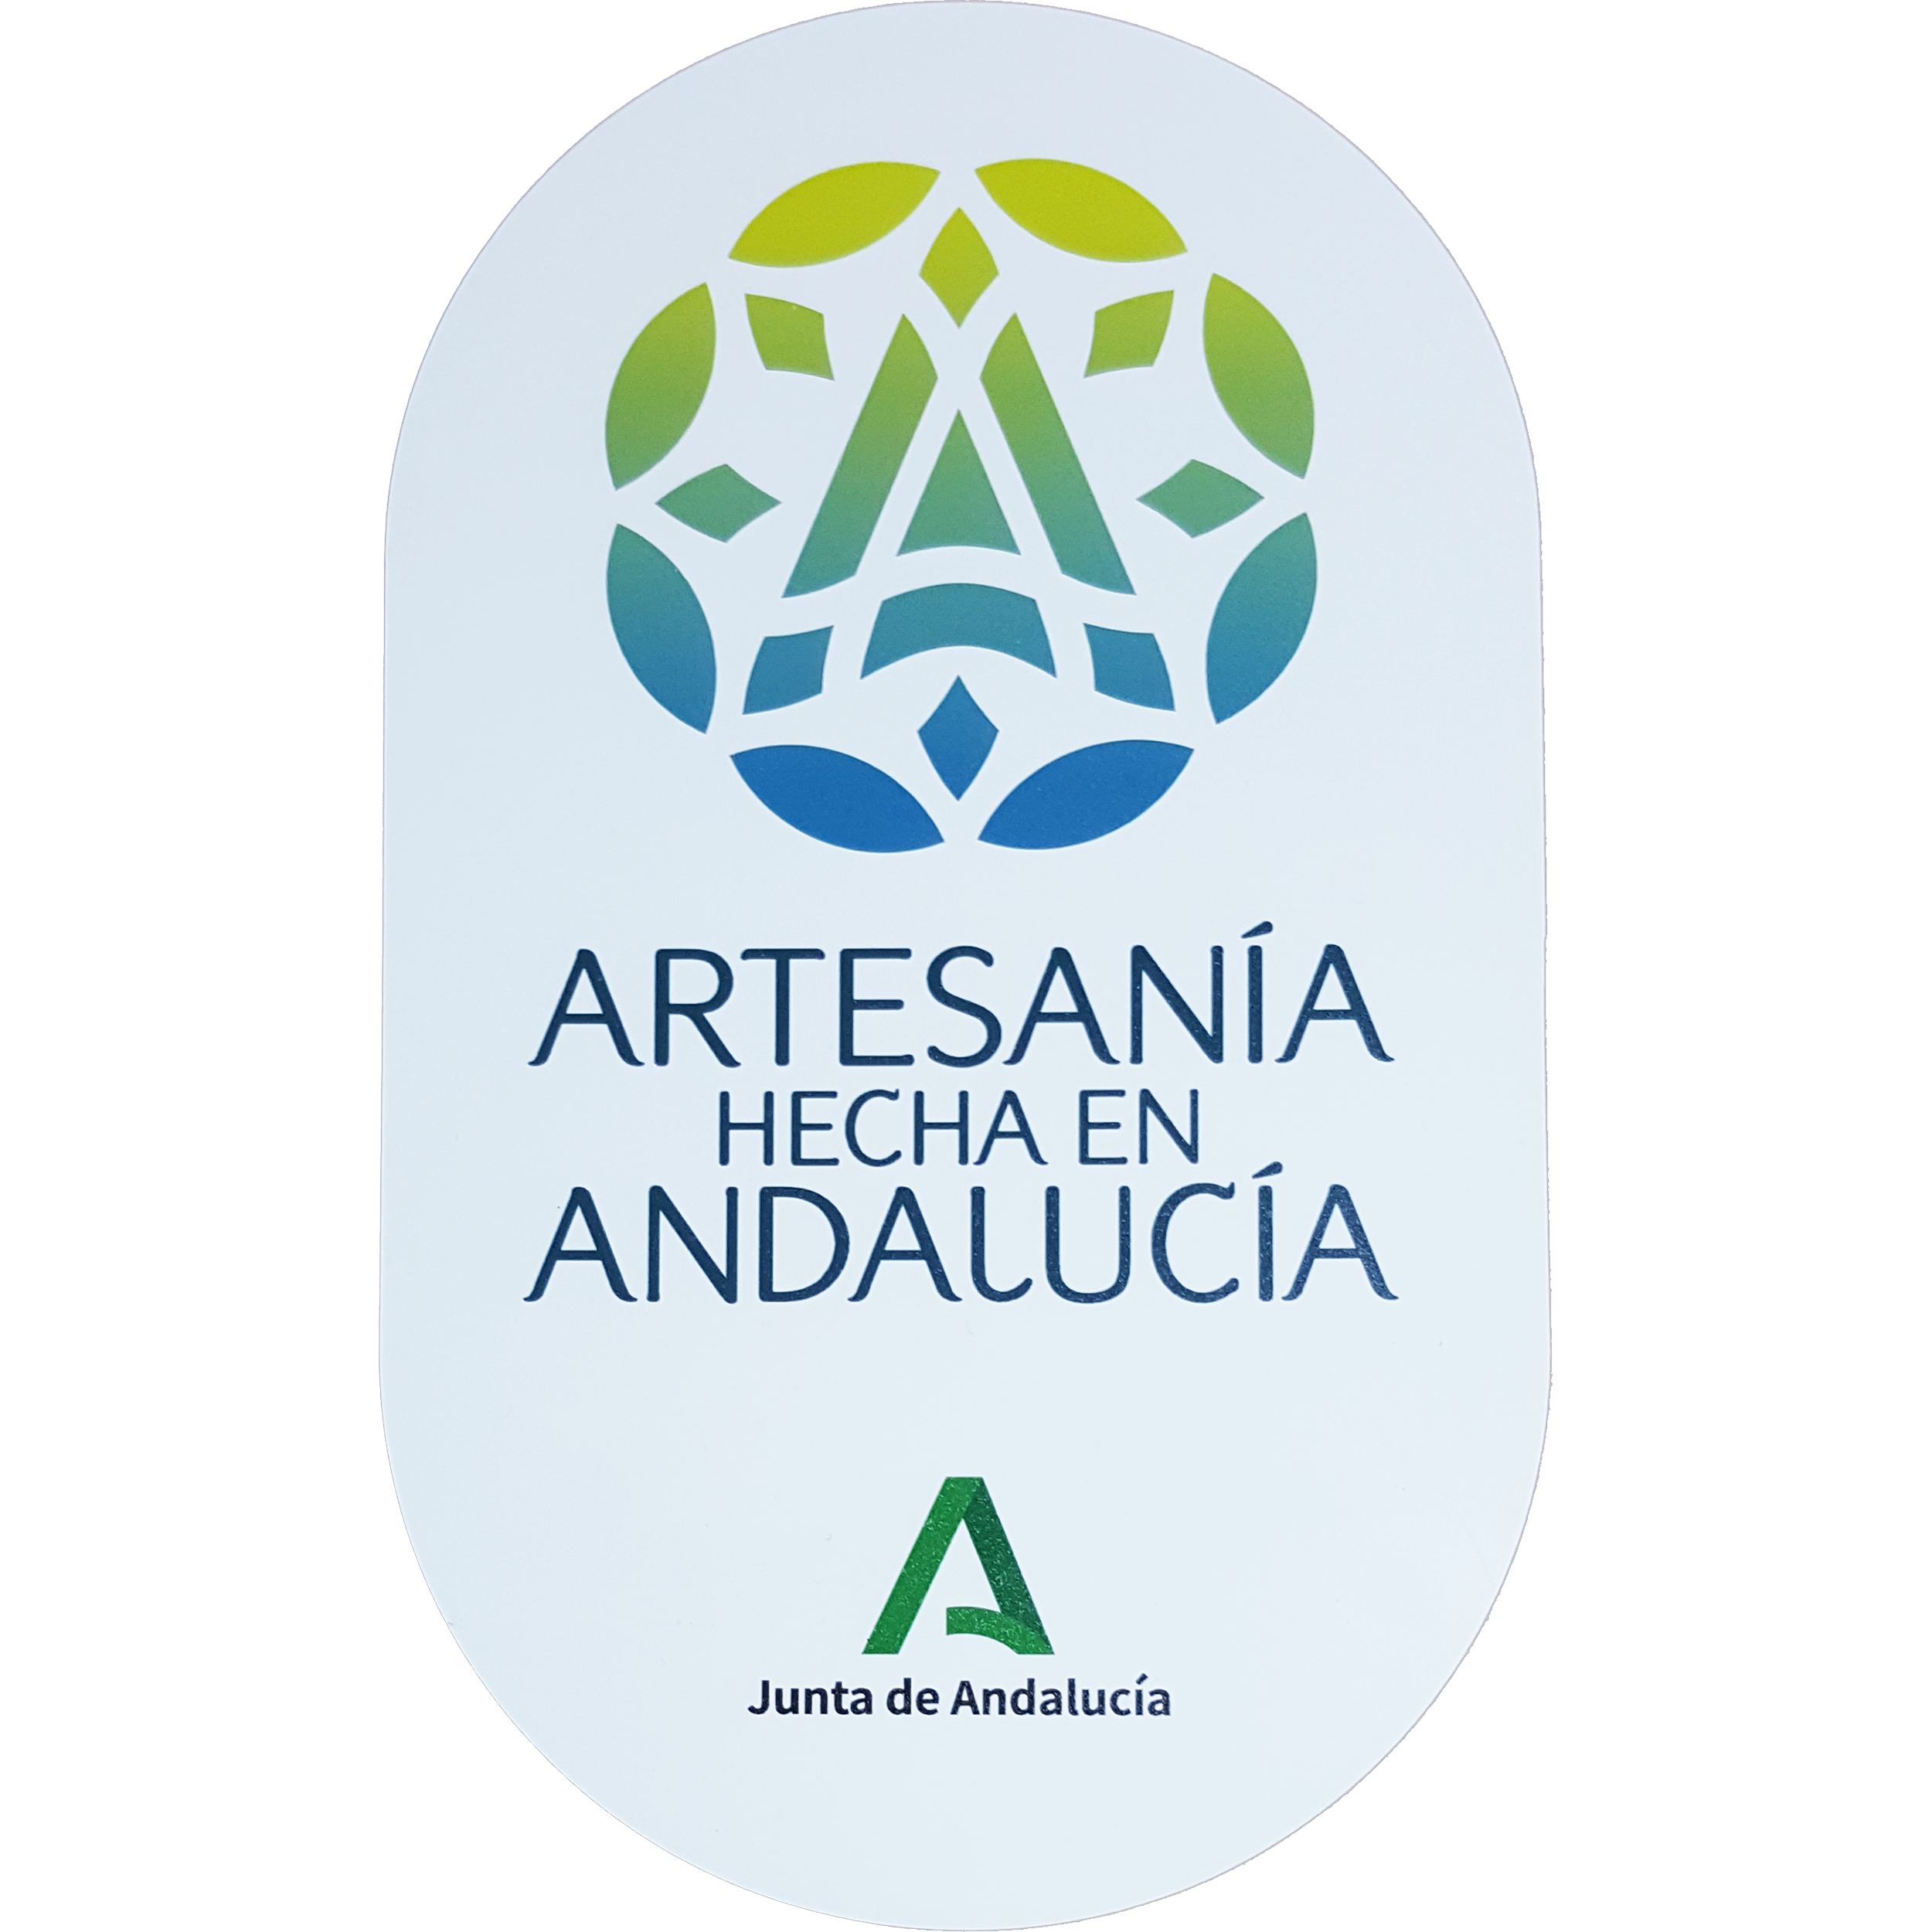 New prestigious brand for Andalusian crafts